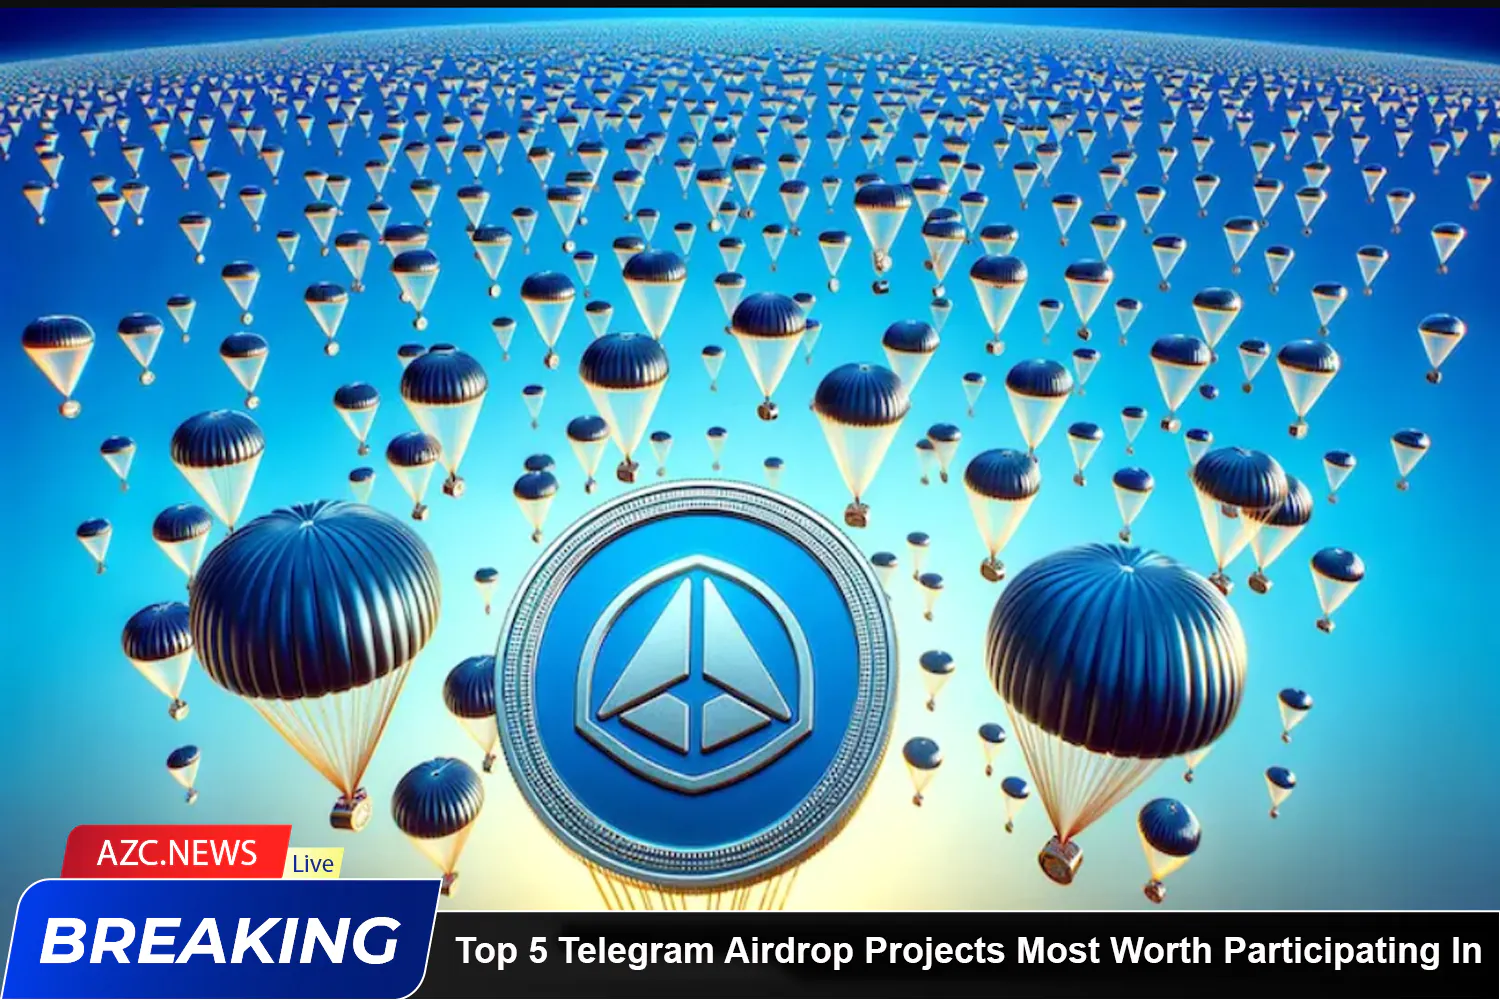 Top 5 Telegram Airdrop Projects Most Worth Participating In